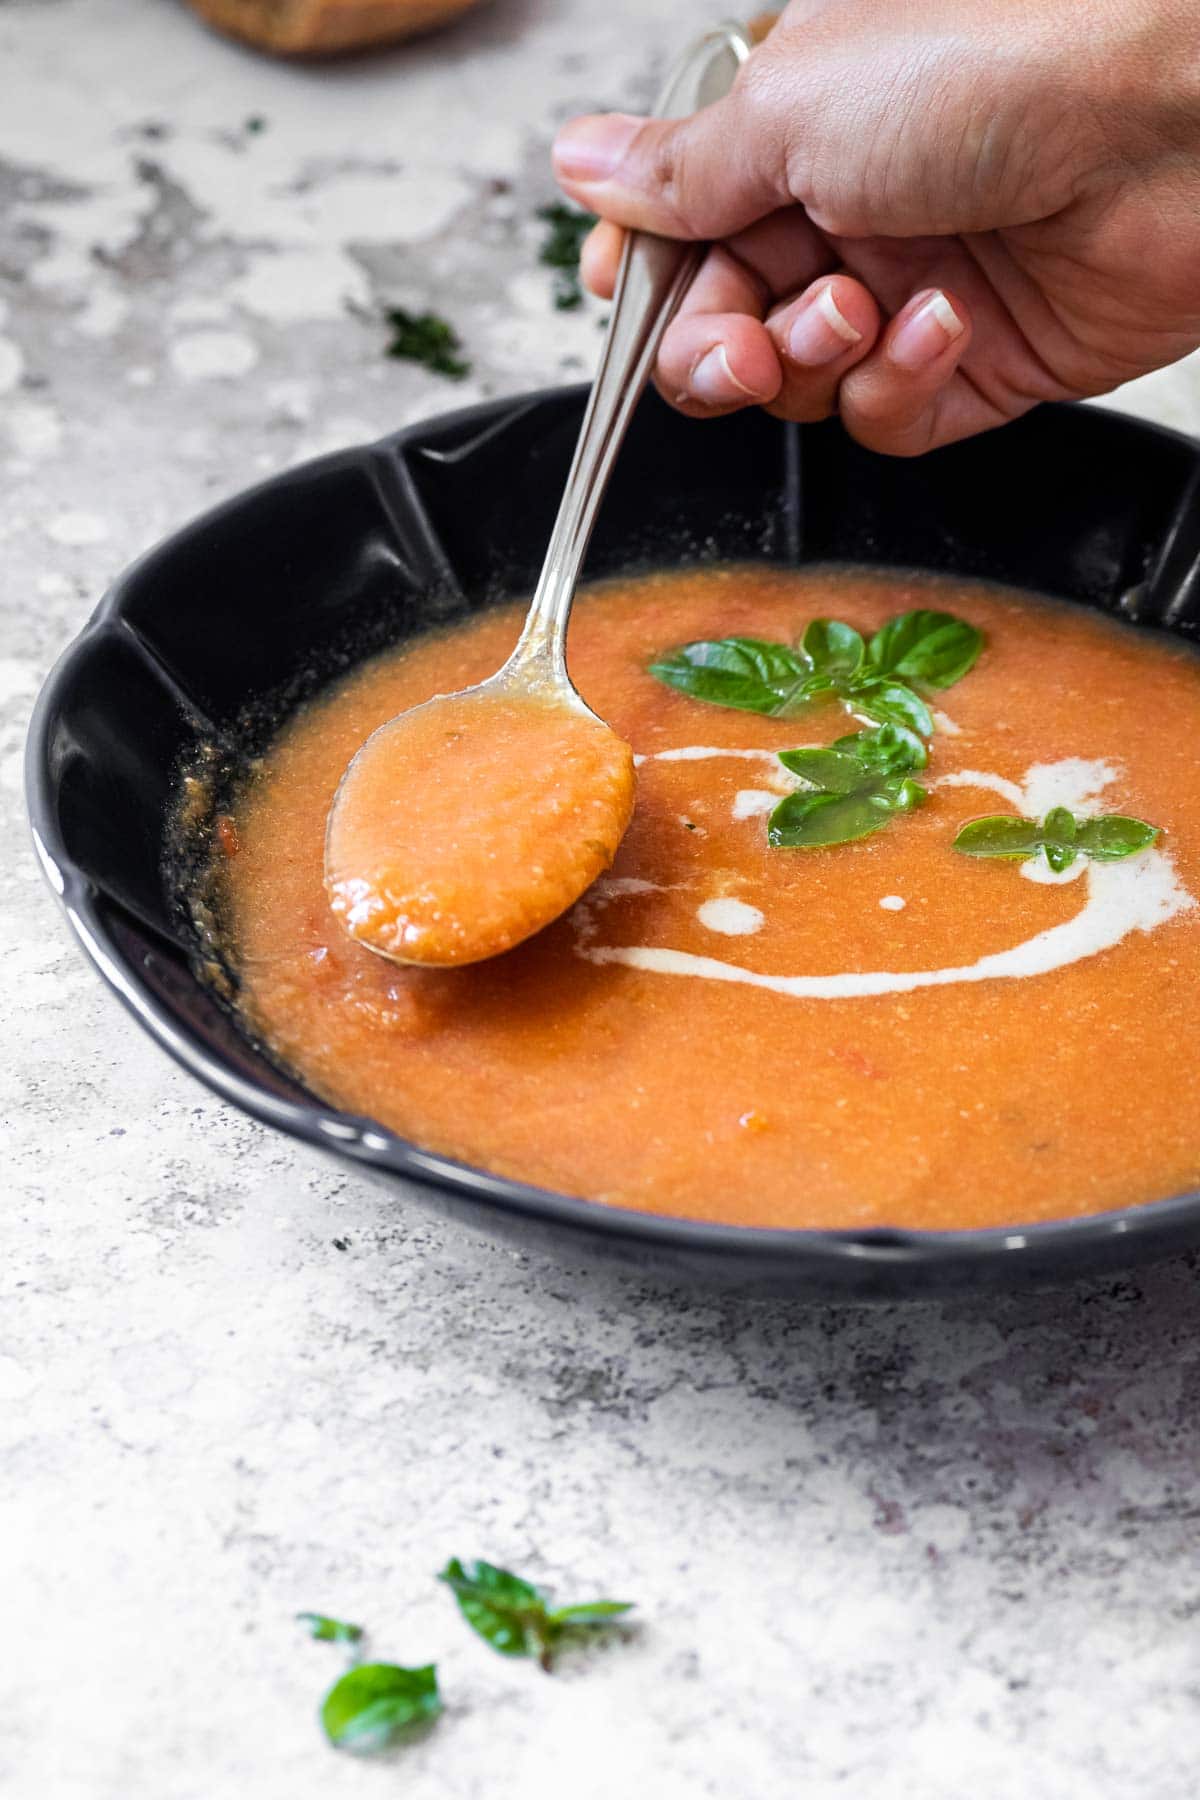 Holding a spoon with tomato soup over the bowl.